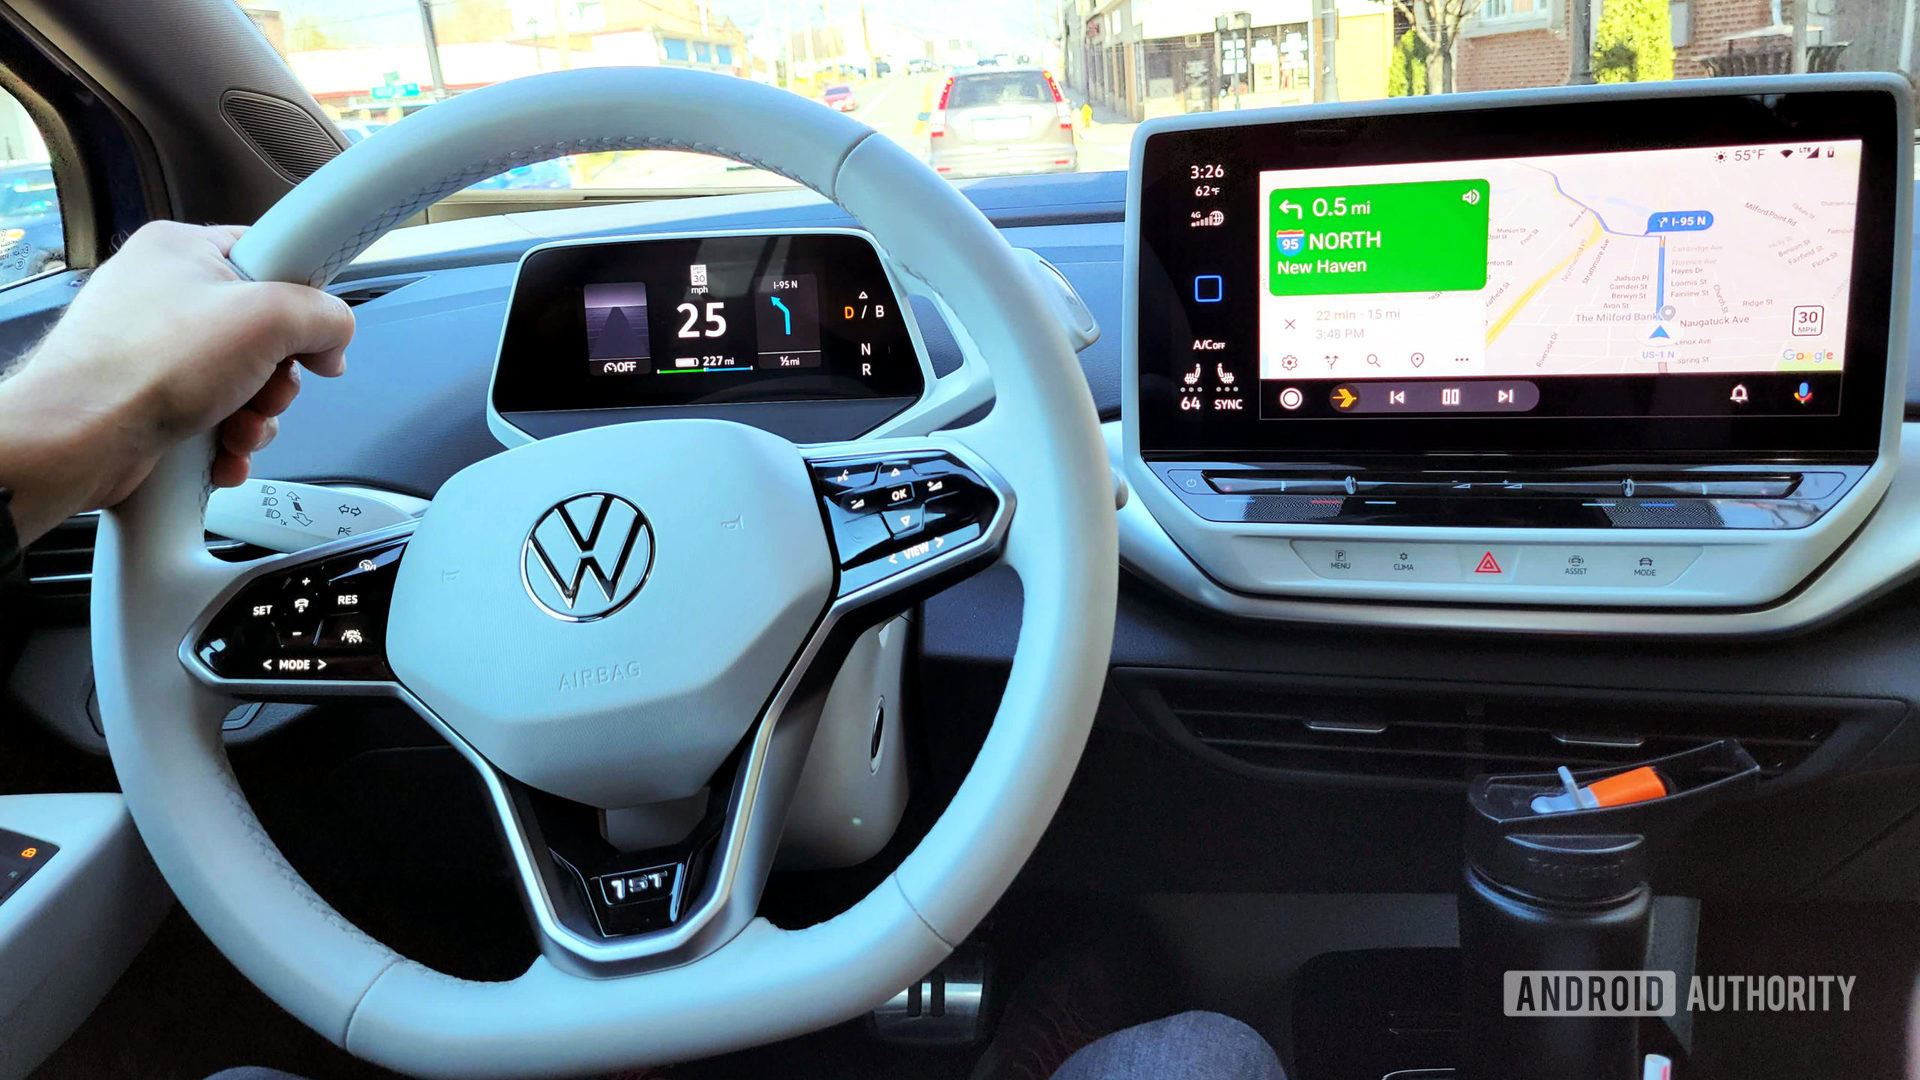 Android Auto not working? Here's how to fix it - Android Authority